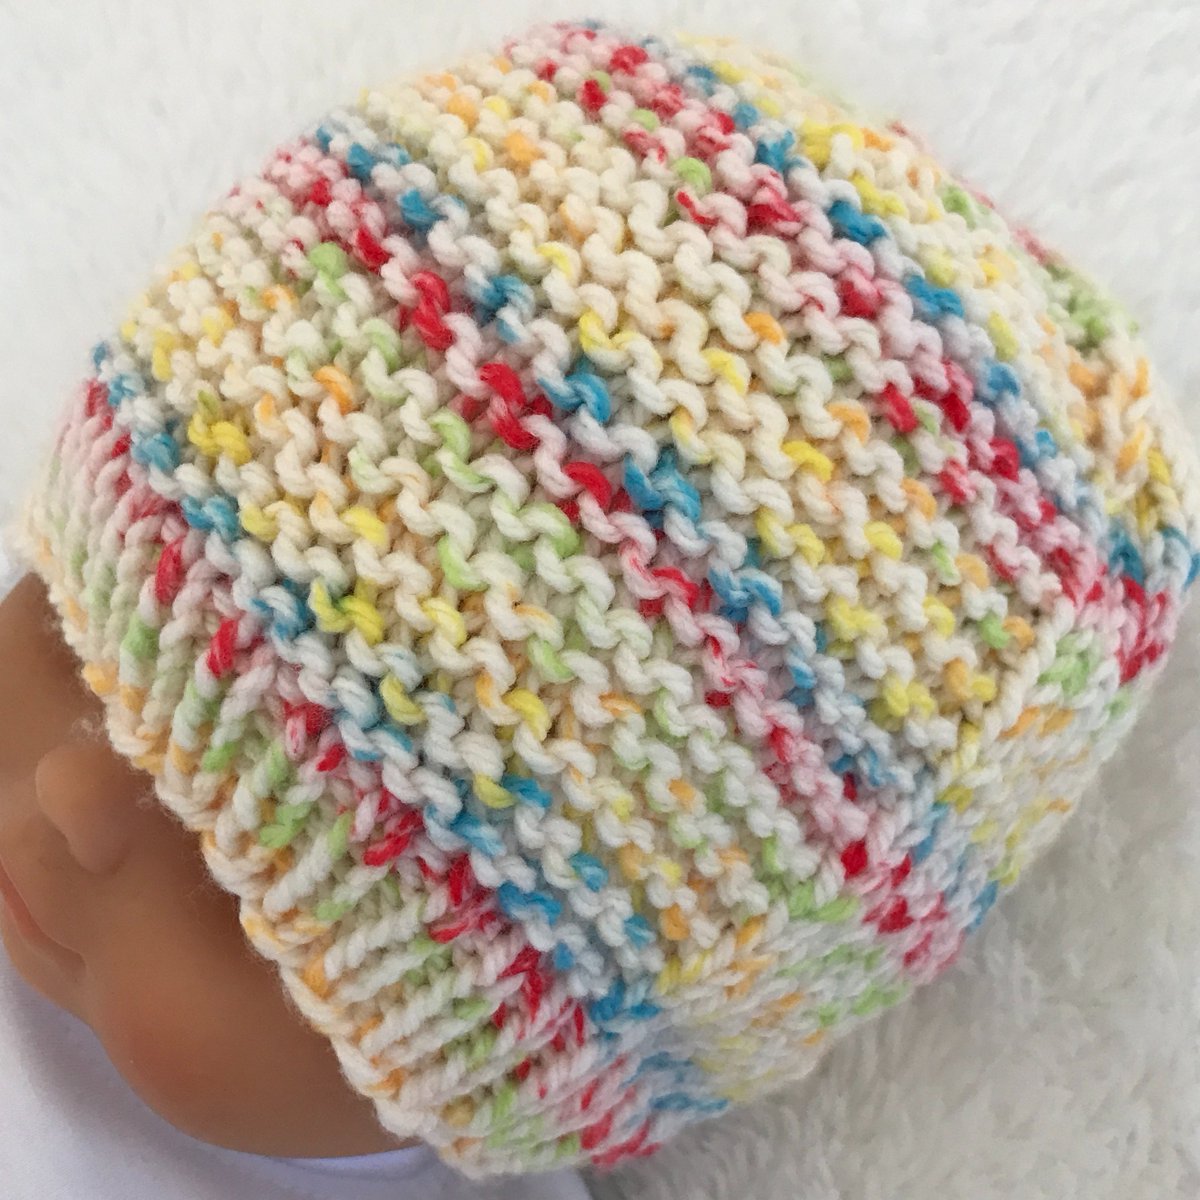 Thinking about the colder weather for your #baby #toddler ? Beanie hat available in my #etsyshop 

handknits34.etsy.com

#UKGiftHour #ukgiftam #shopindie #beaniehat #toddlerhat #handmadeuk #knitted #rainbow